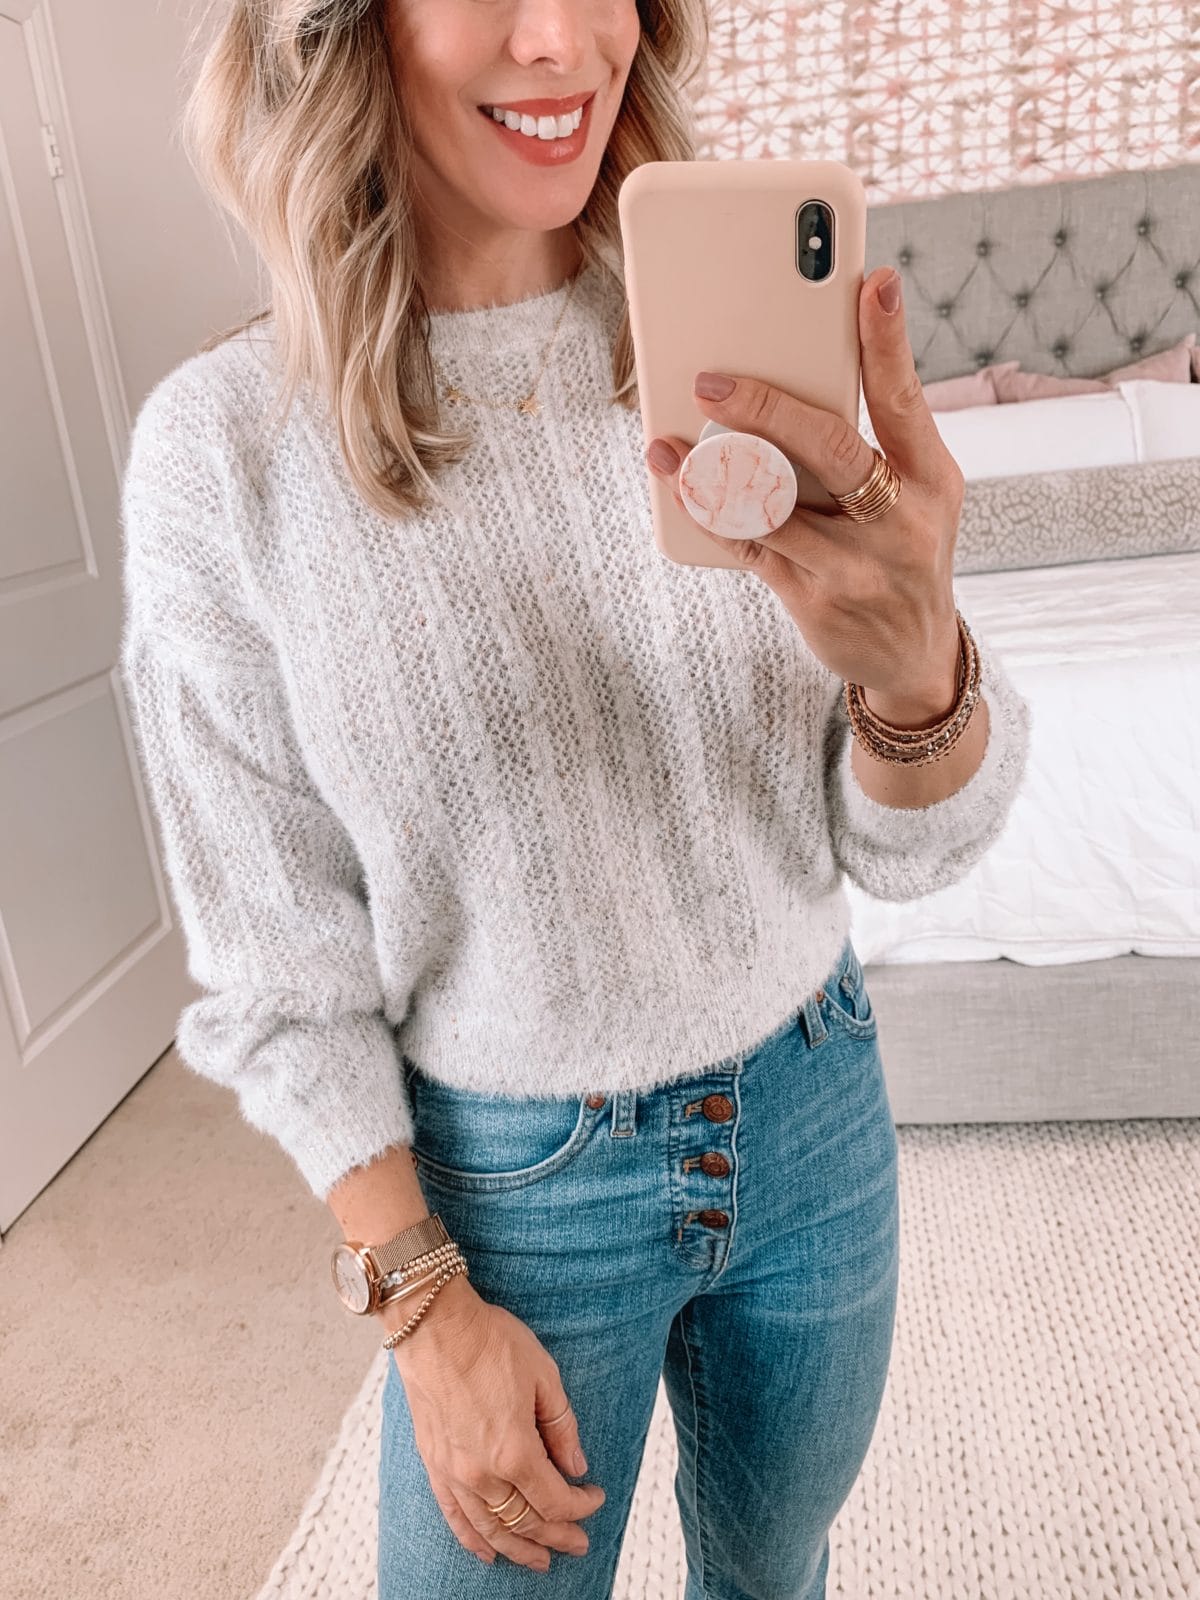 Style a Friend, Sweater, Jeans